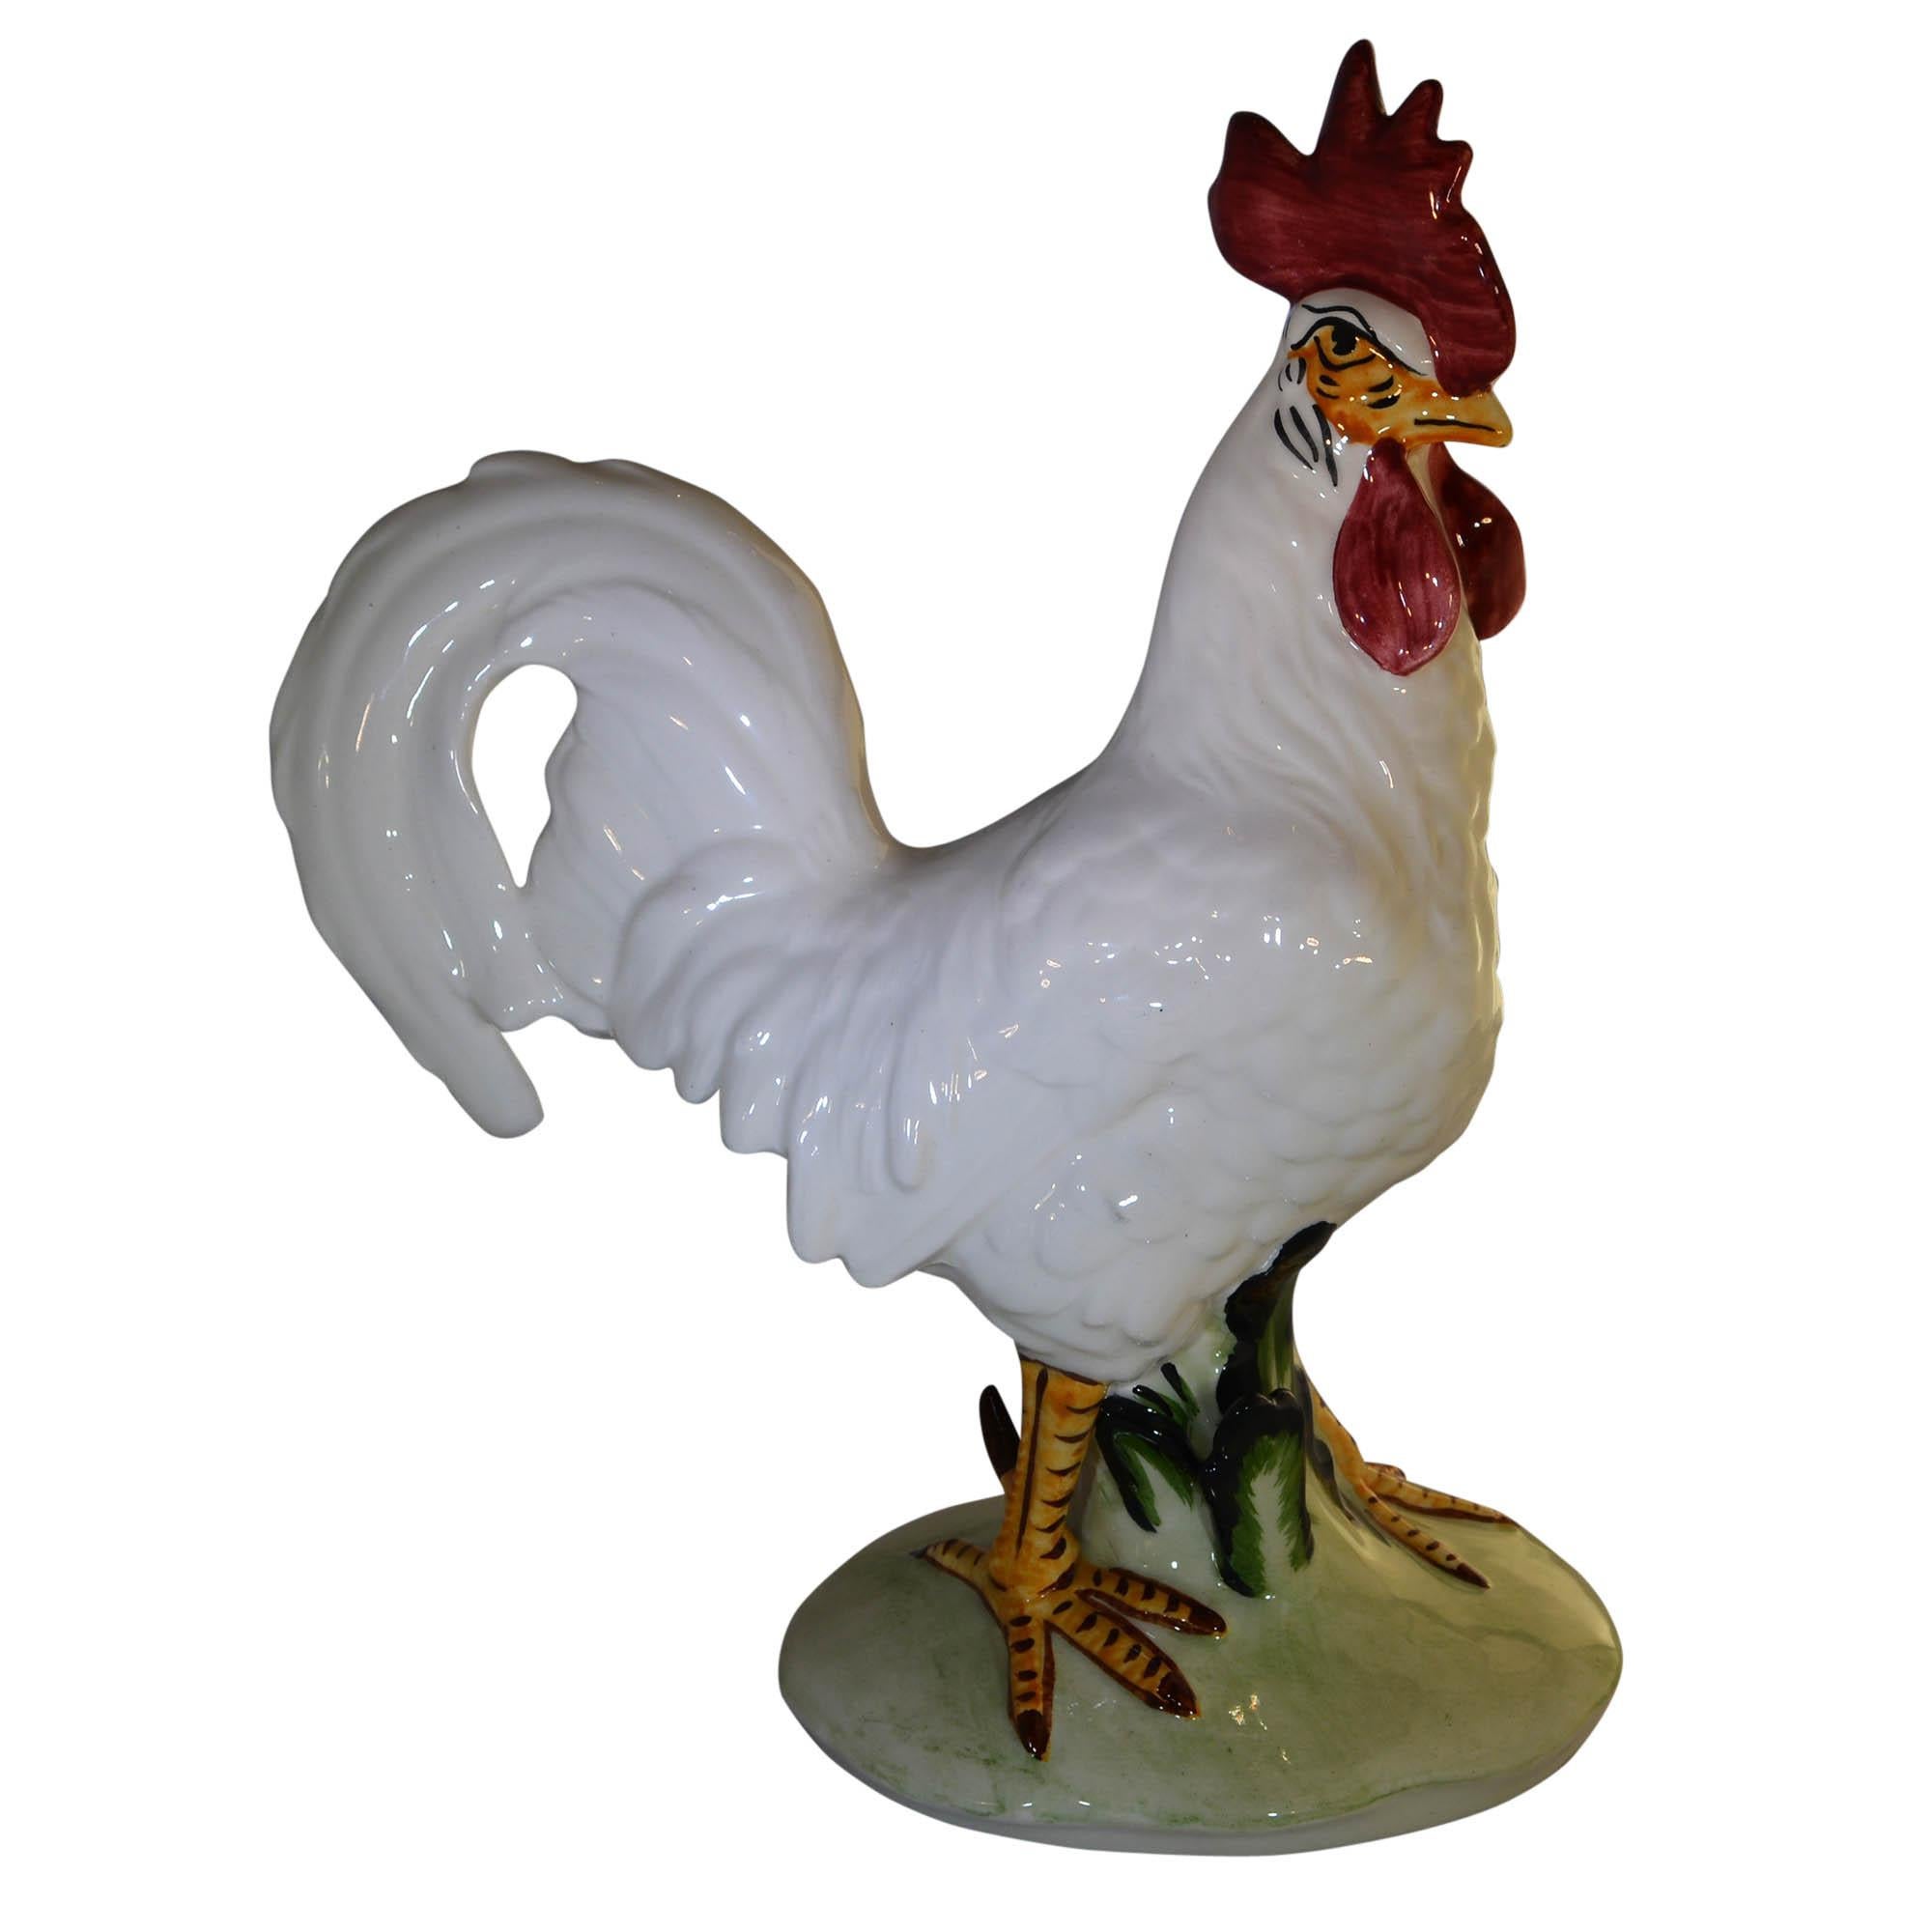 This impressive rooster from Pennsbury Pottery stands tall, giving all other a steely glare. His feet have detailed markings. He is standing in pale green grass.

Pennsbury Pottery was founded by Henry and Lee Below in Morrisville, Pennsylvania,